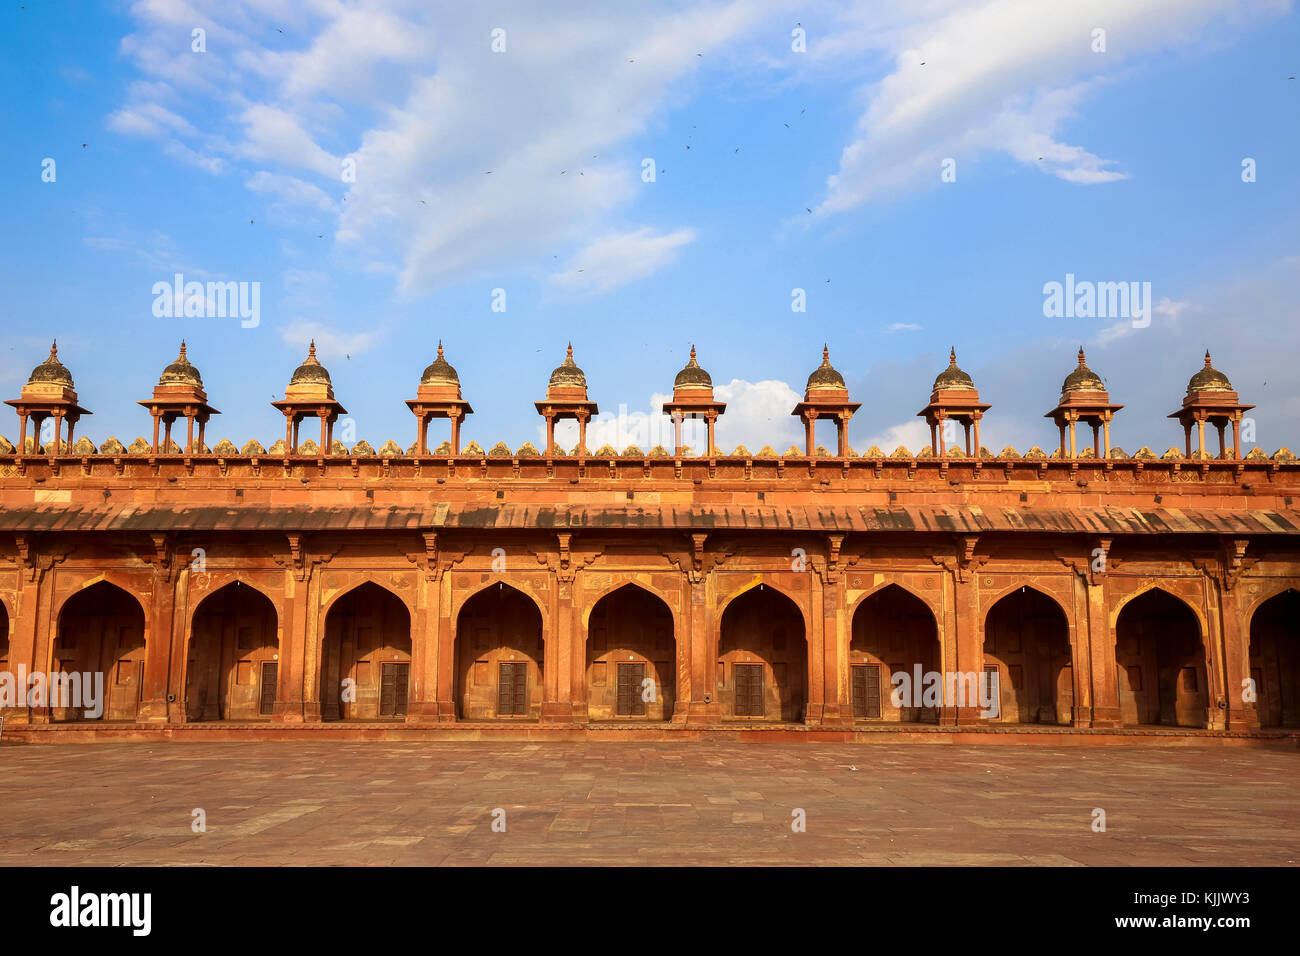 Fatehpur Sikri, founded in 1569 by the Mughal Emperor Akbar, served as the capital of the Mughal Empire from 1571 to 1585.  Surrounding wall of the Ja Stock Photo